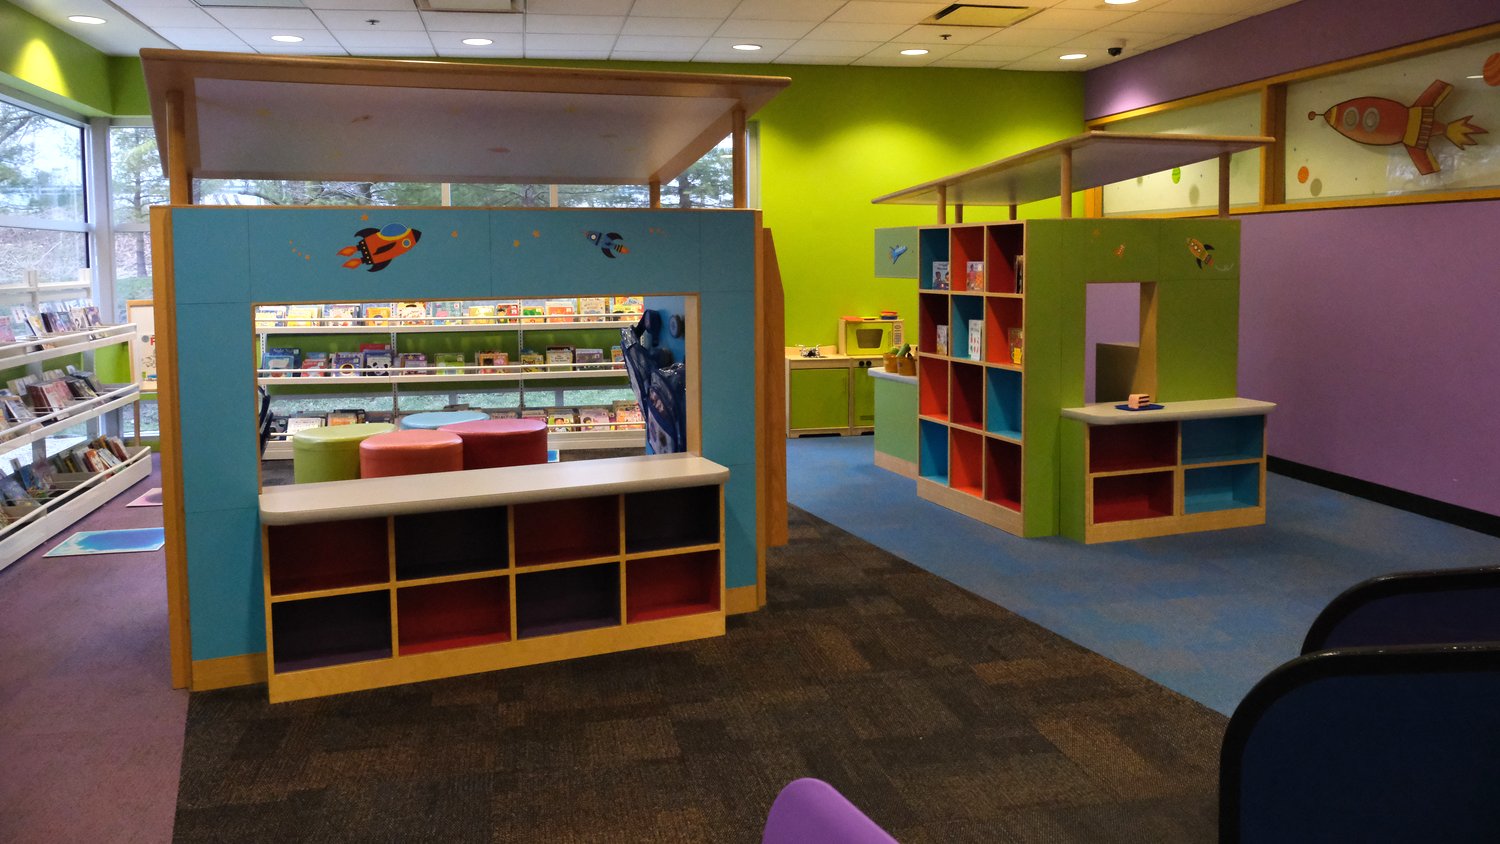 Play space in the library.